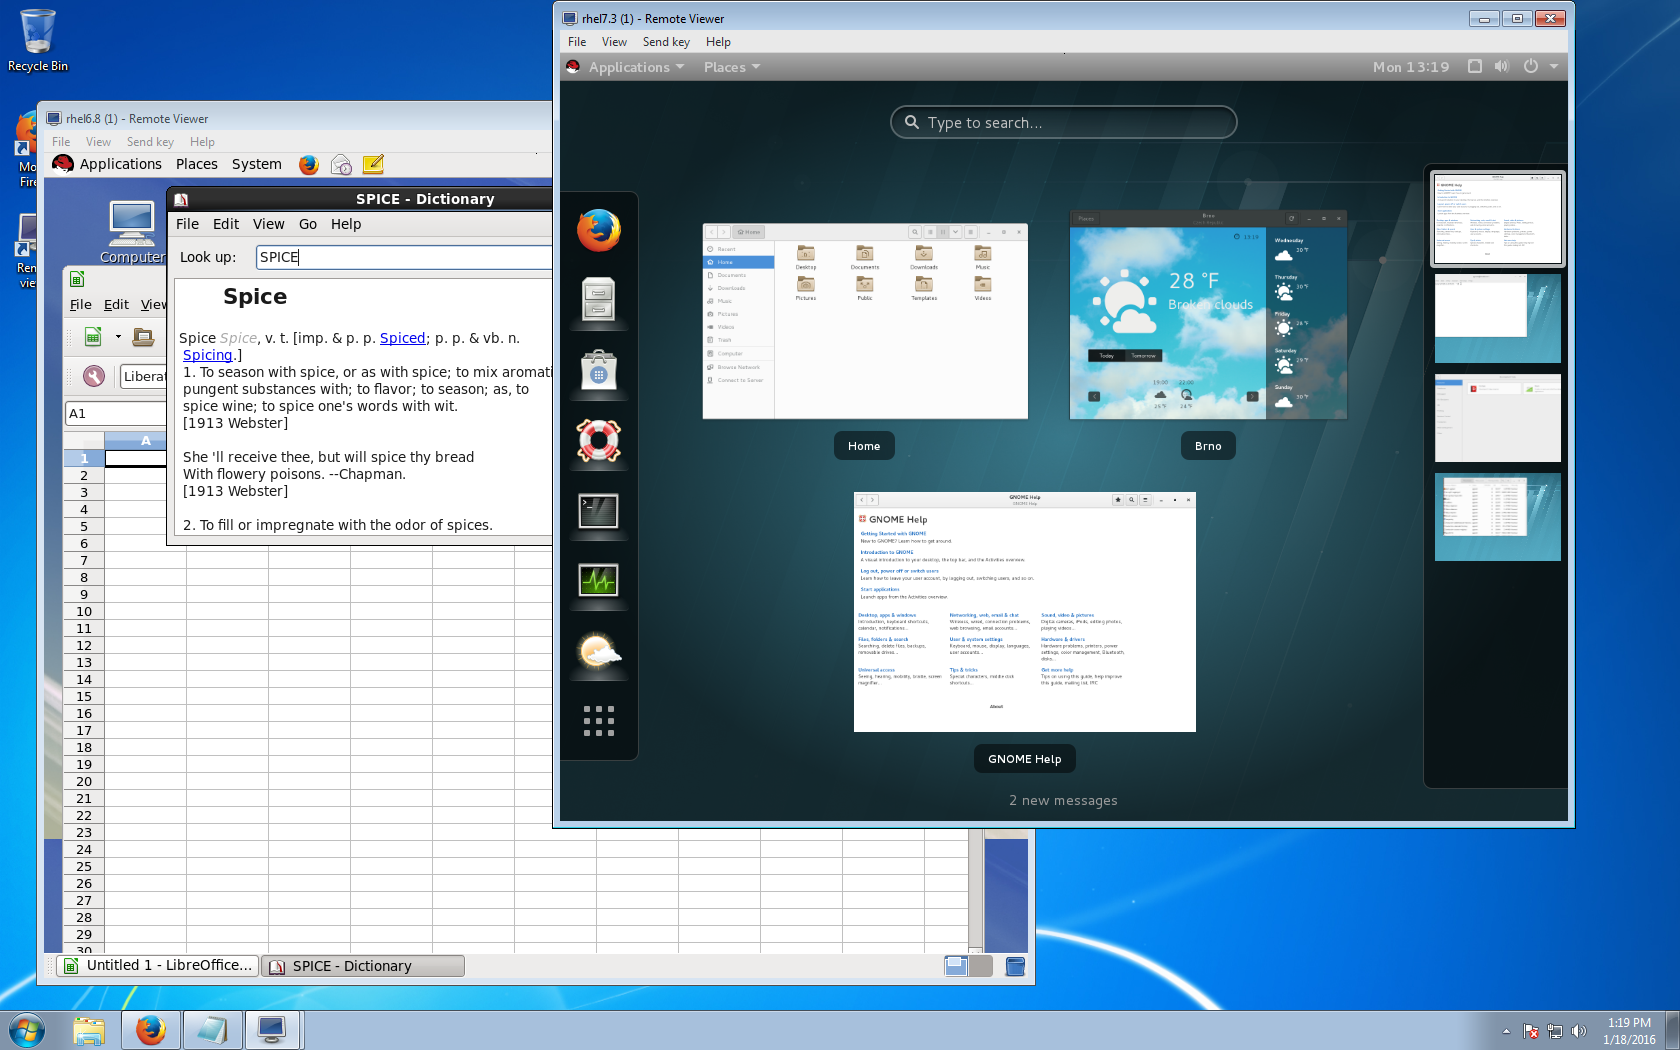 Windows7 client connected to RHEL6 and RHEL7 guests